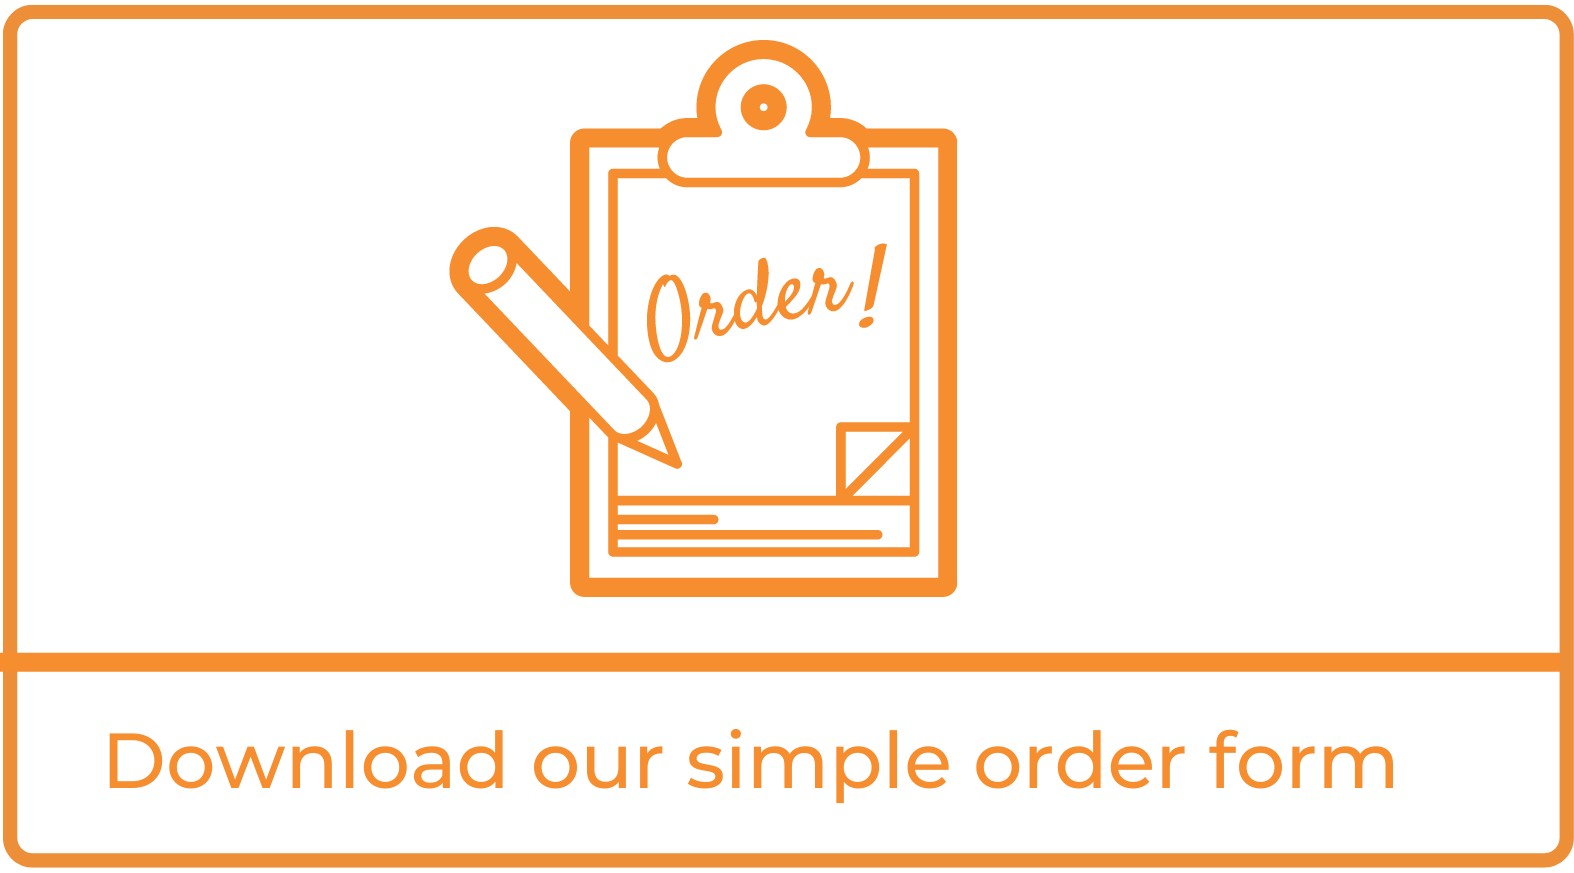 Download our simple order form!